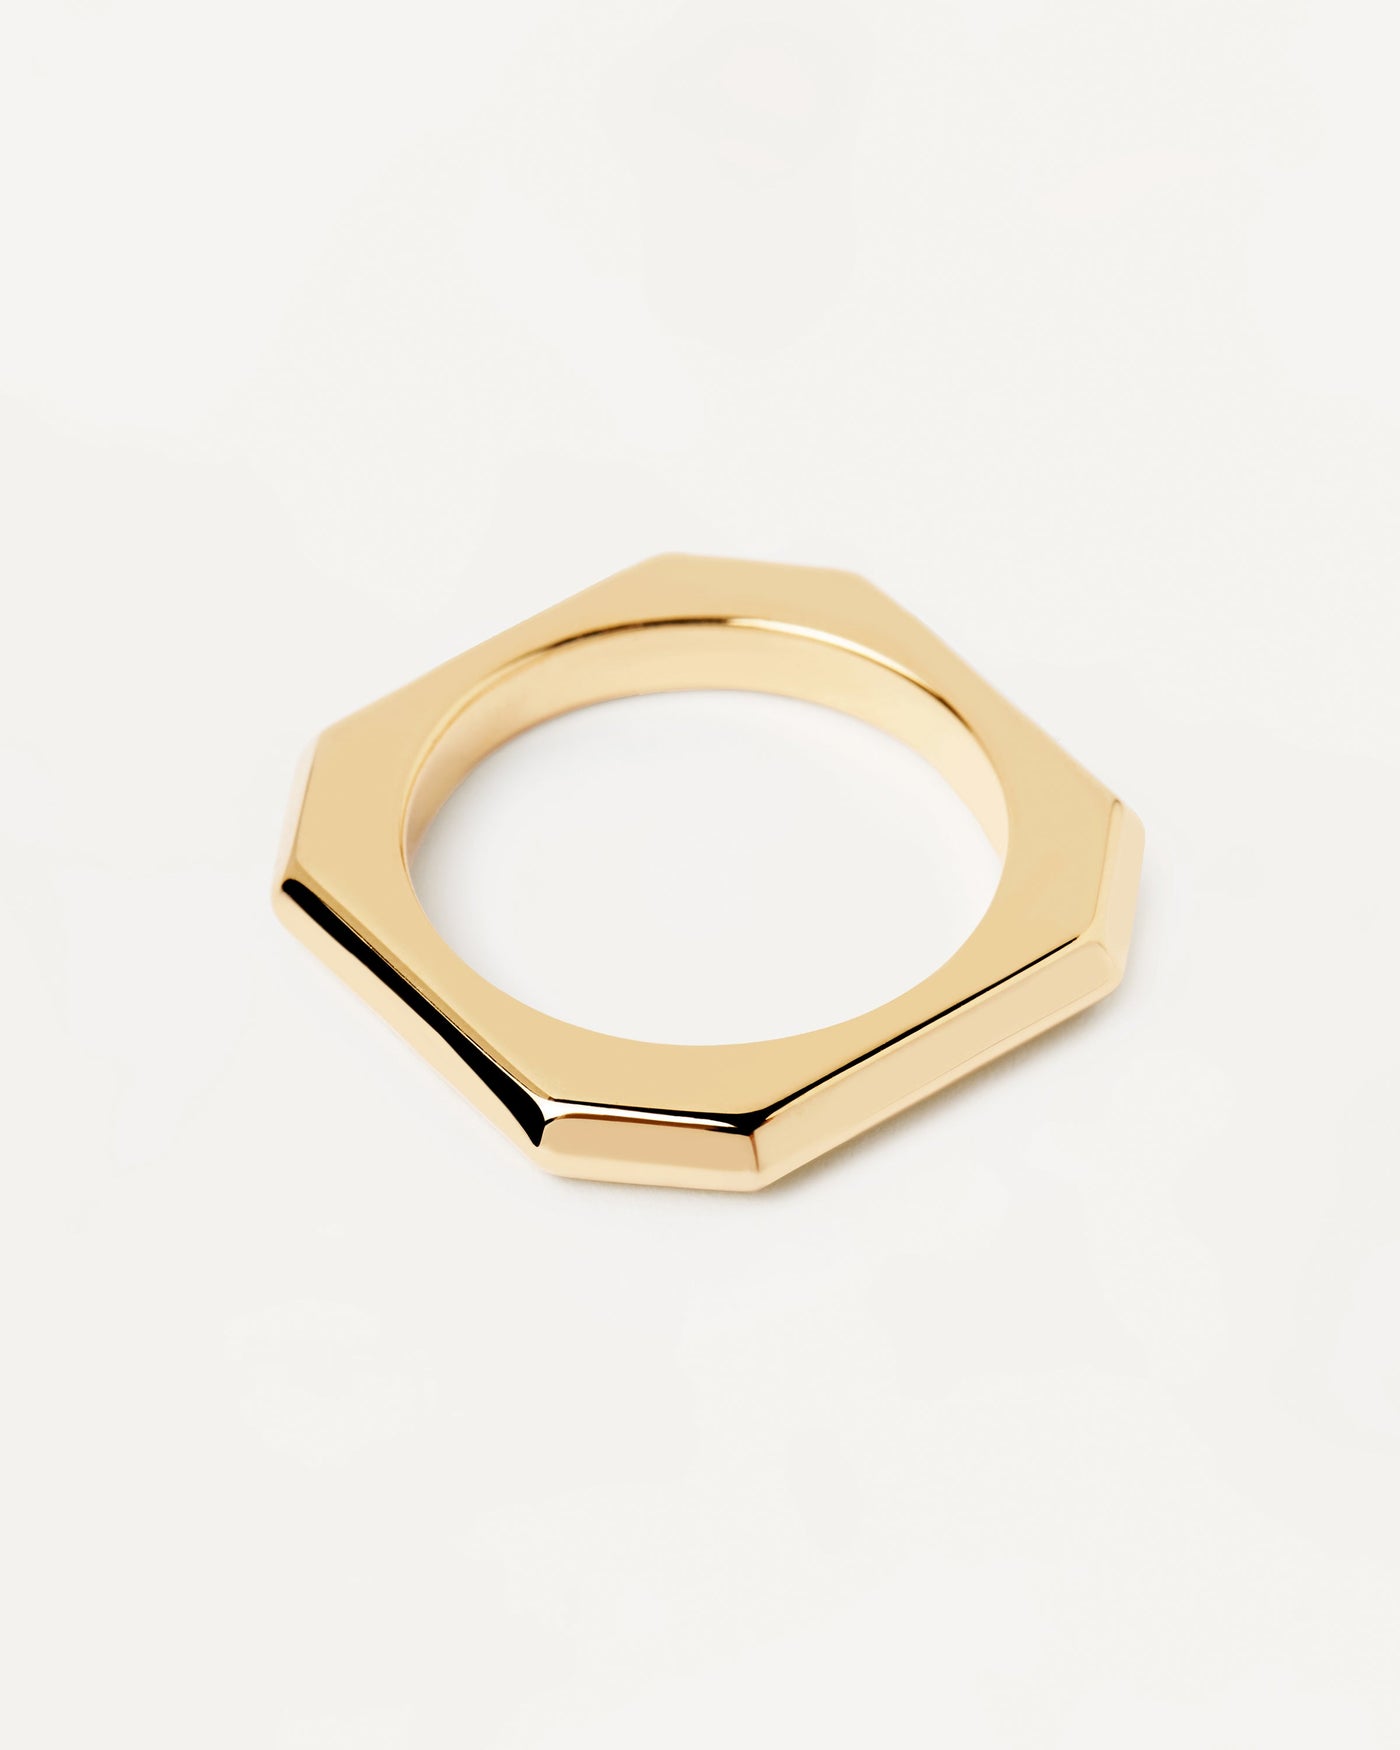 2023 Selection | Signature Link Ring. Octogonal plain ring shaped as a cable link in 18K gold plating. Get the latest arrival from PDPAOLA. Place your order safely and get this Best Seller. Free Shipping.